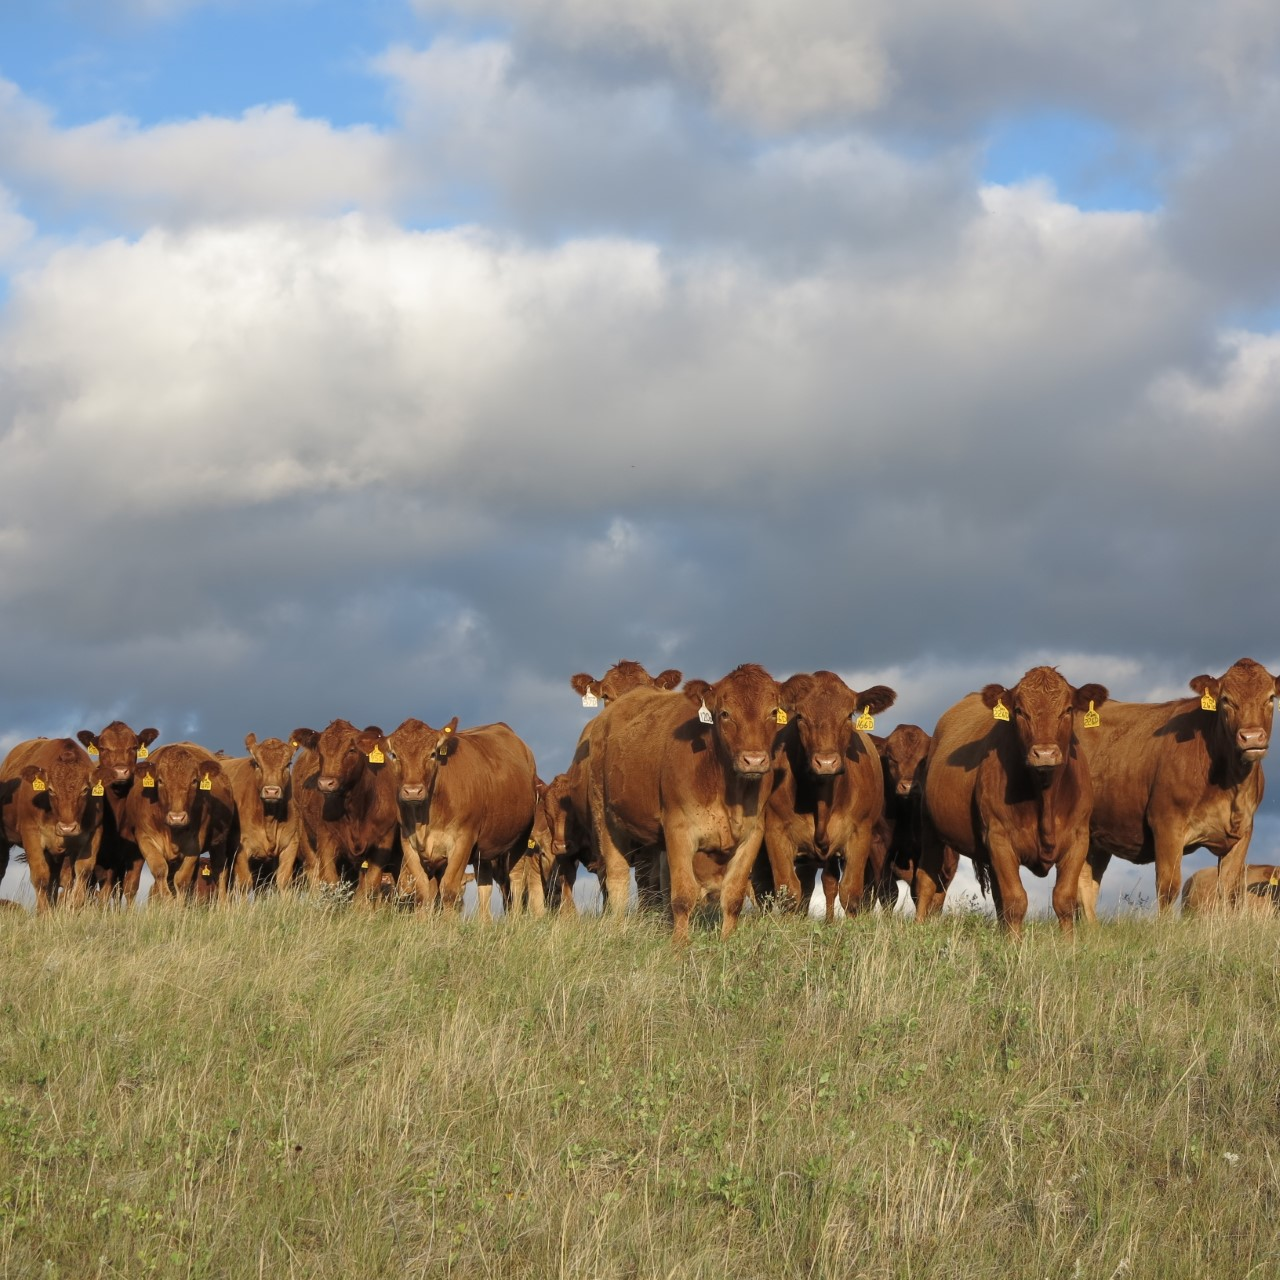 Afternoon Ag News, March 16, 2022: U.S. beef exports soared in January